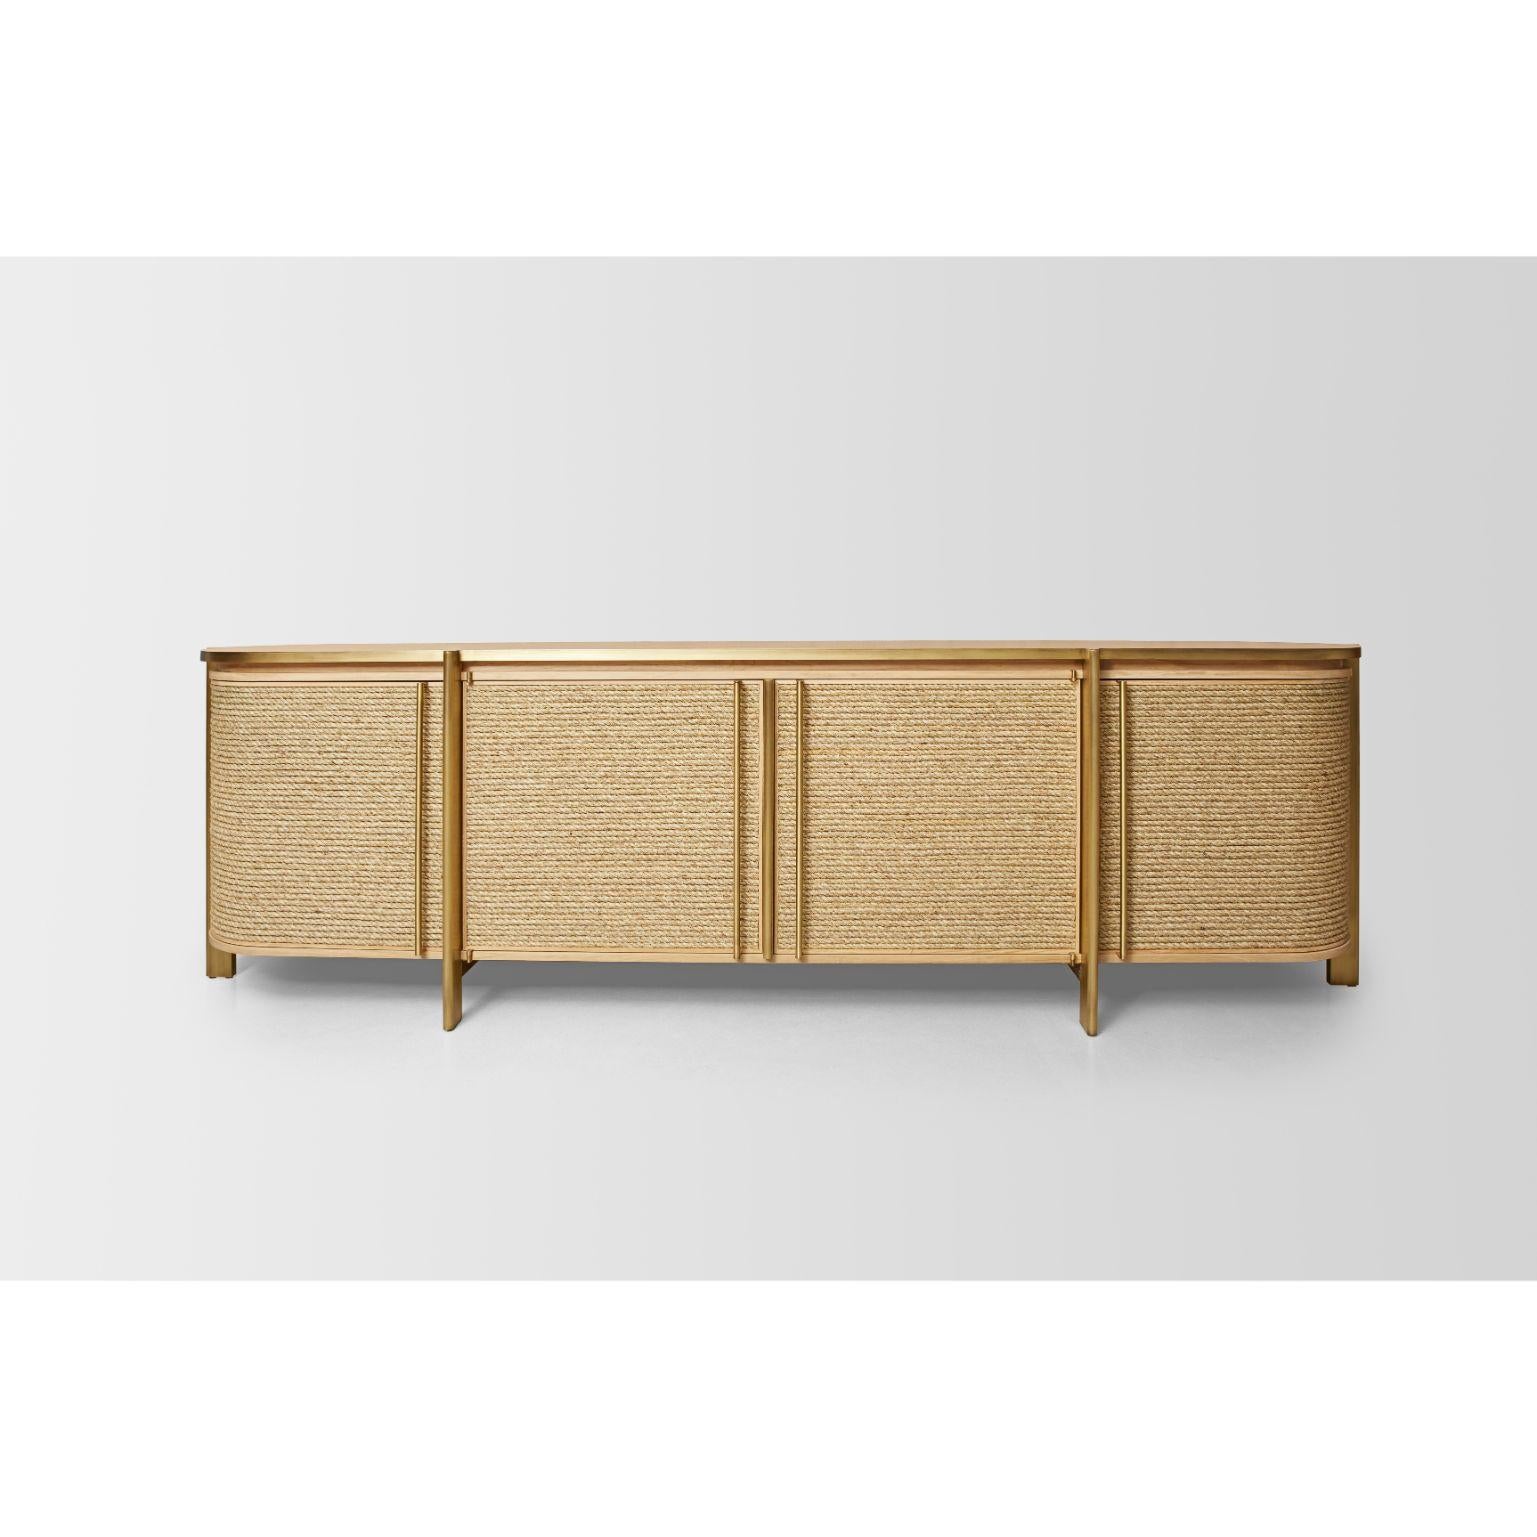 Les Cordes - buffet by Marc Dibeh
2020
Materials: French Oak, Hemp Rope, Brass
Dimensions: W300 x H85 x D65 cm 

Beirut based designer Marc Dibeh narrates his cultural environment through compelling interiors and products.
His studio’s